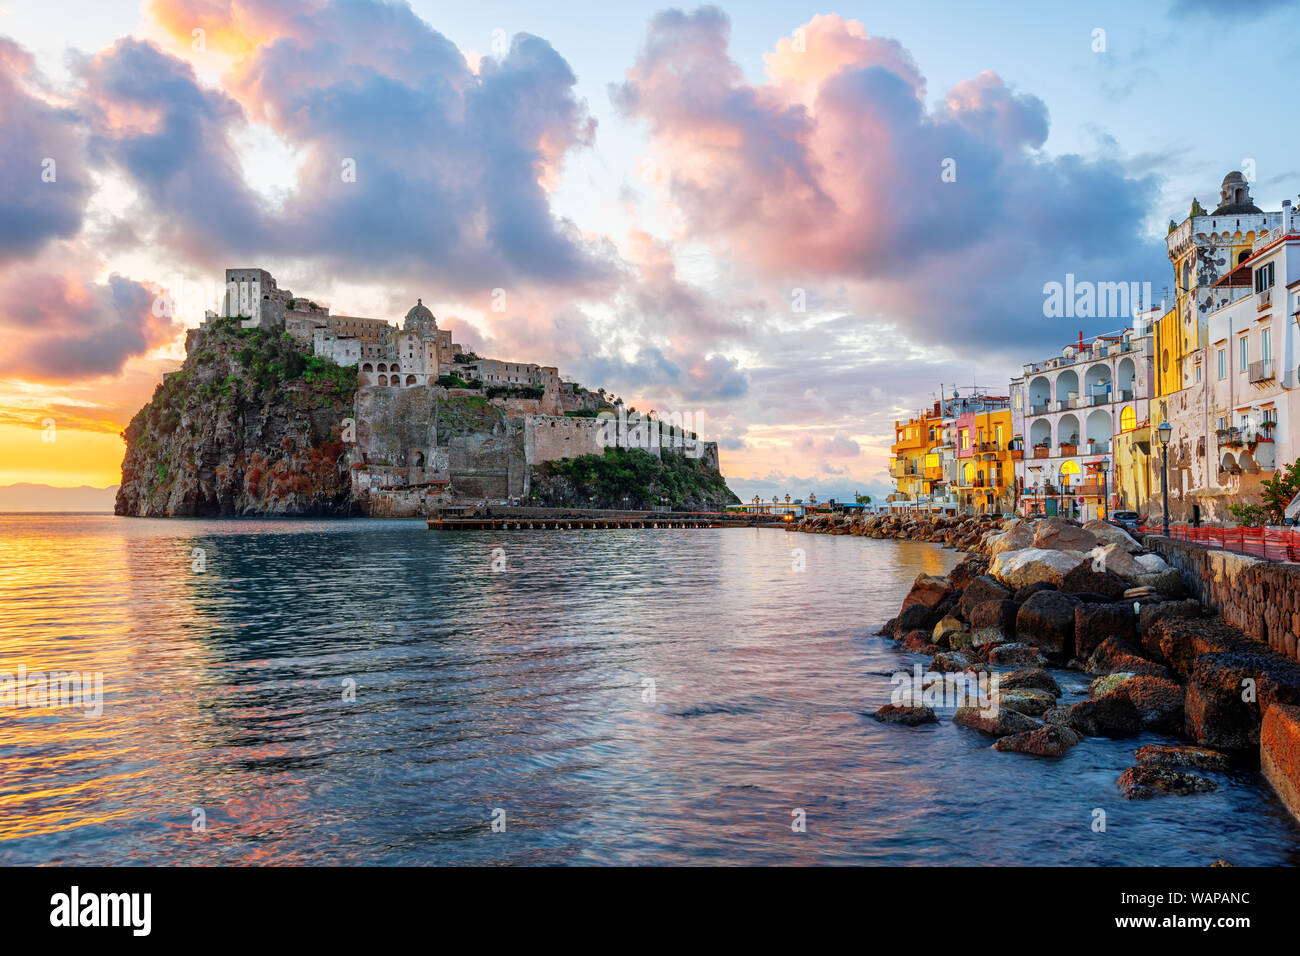 Historical Aragonese castle on a rock in Mediterranean sea, Ischia island, Gulf of Naples, Italy, in dramatic sunrise light Stock Photo